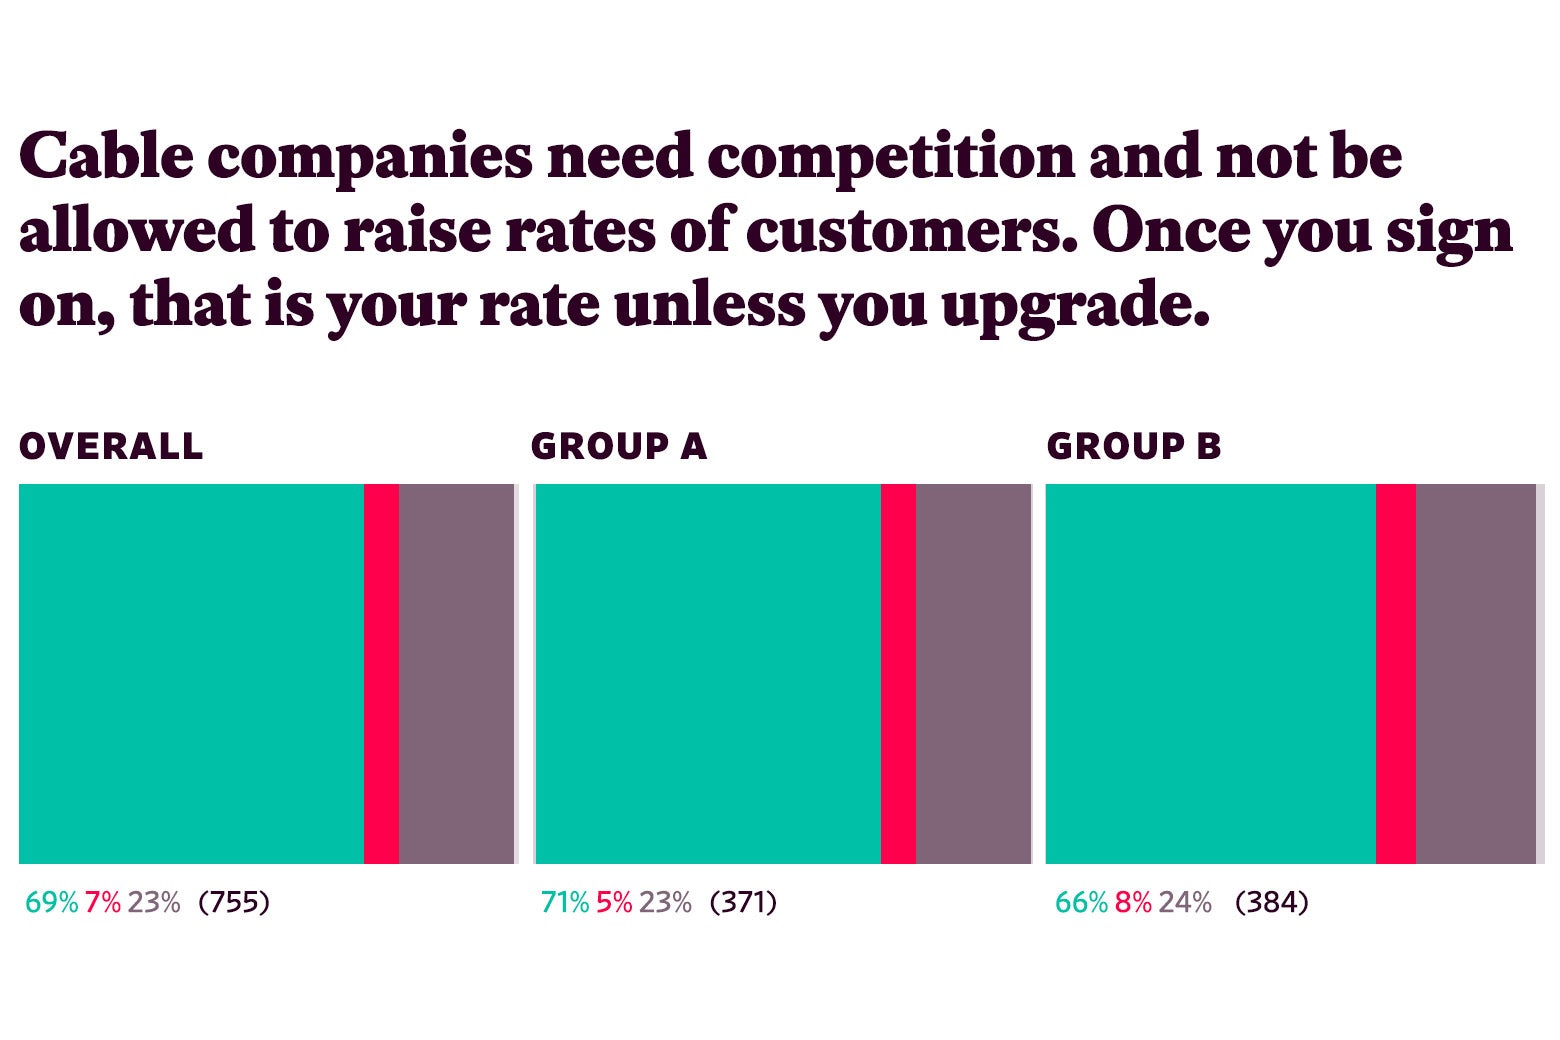 Responses to “Cable companies need competition and not be allowed to raise rates of customers. Once you sign on, that is your rate unless you upgrade.”